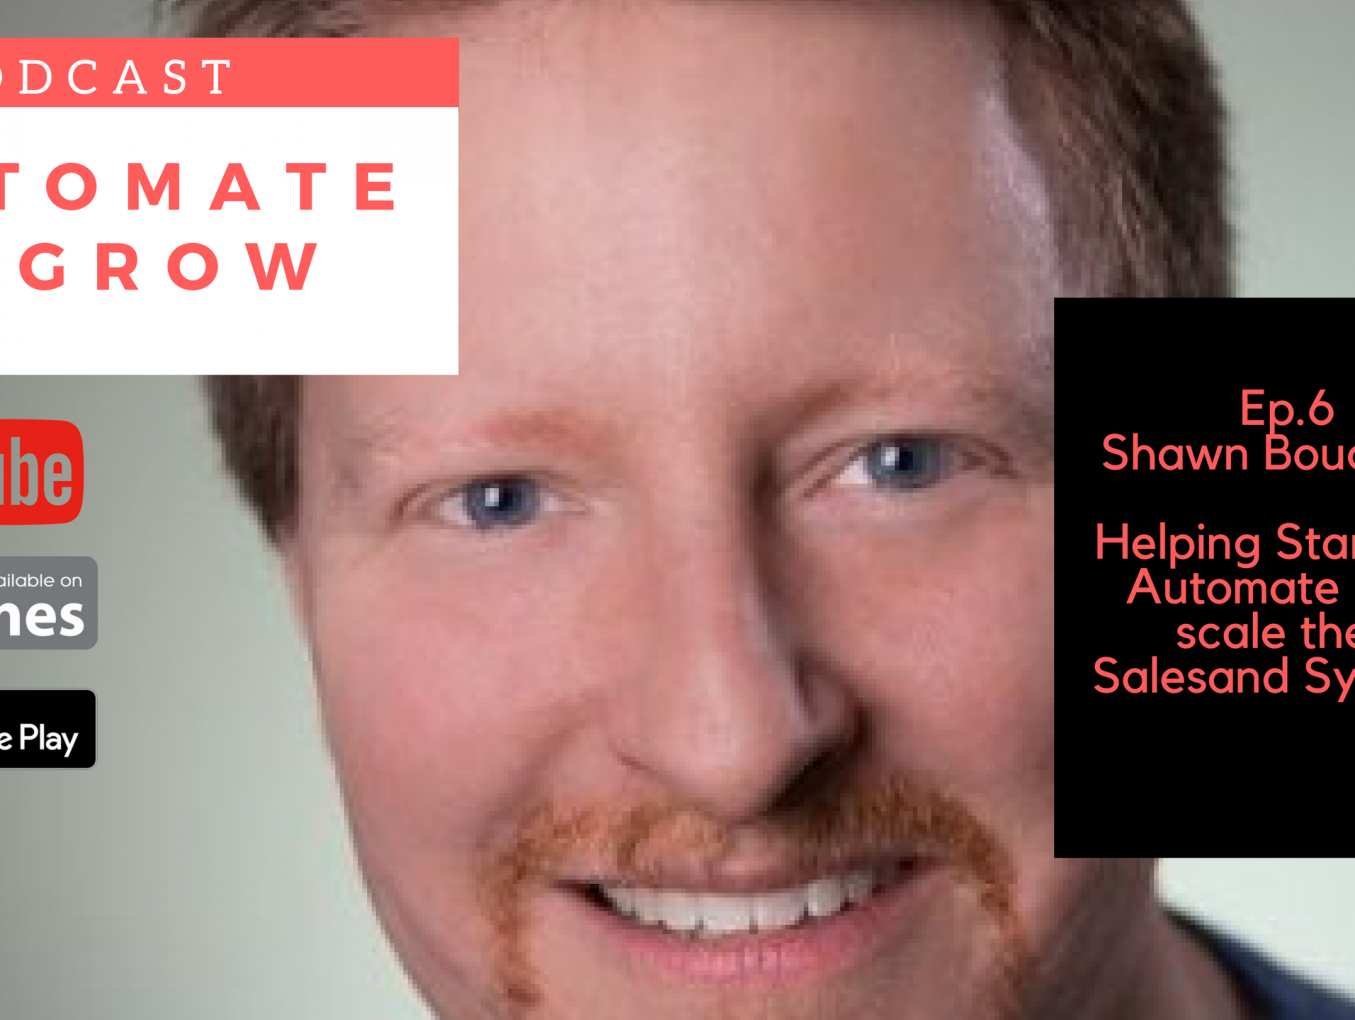 Episode 6 Shawn Bouchard Growing your sales using systems and technology